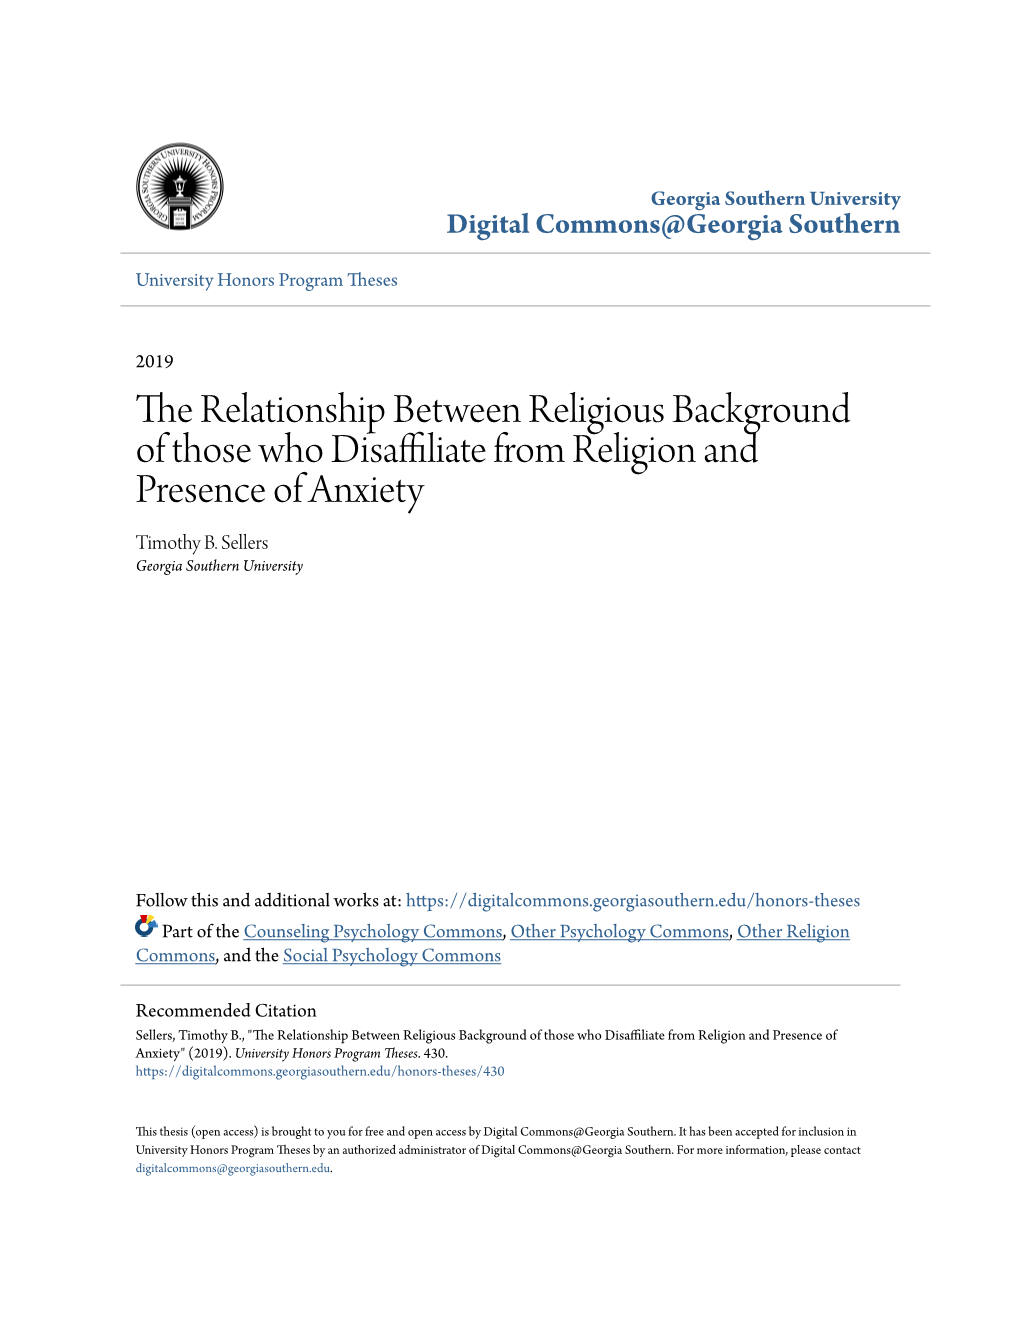 The Relationship Between Religious Background of Those Who Disaffiliate from Religion and Presence of Anxiety Timothy B